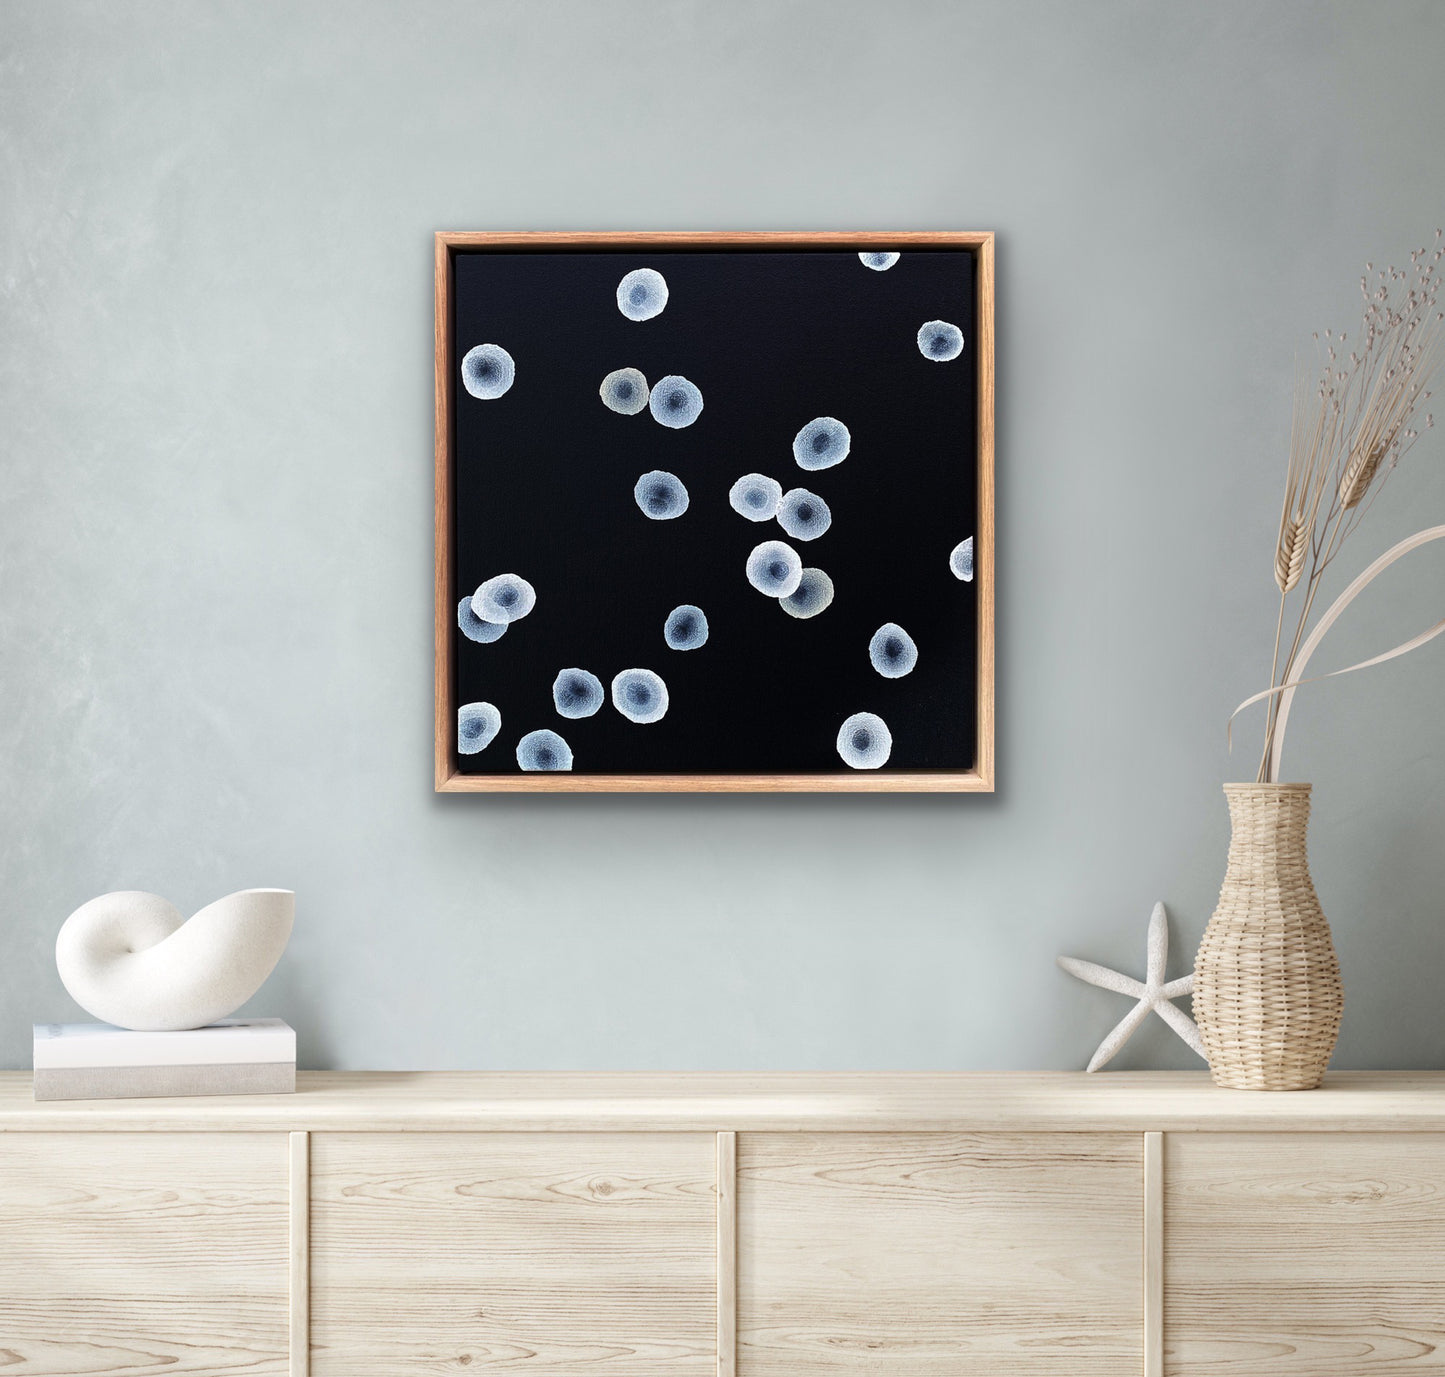 Orbicular Echo VI - Abstract Monochrome Painting